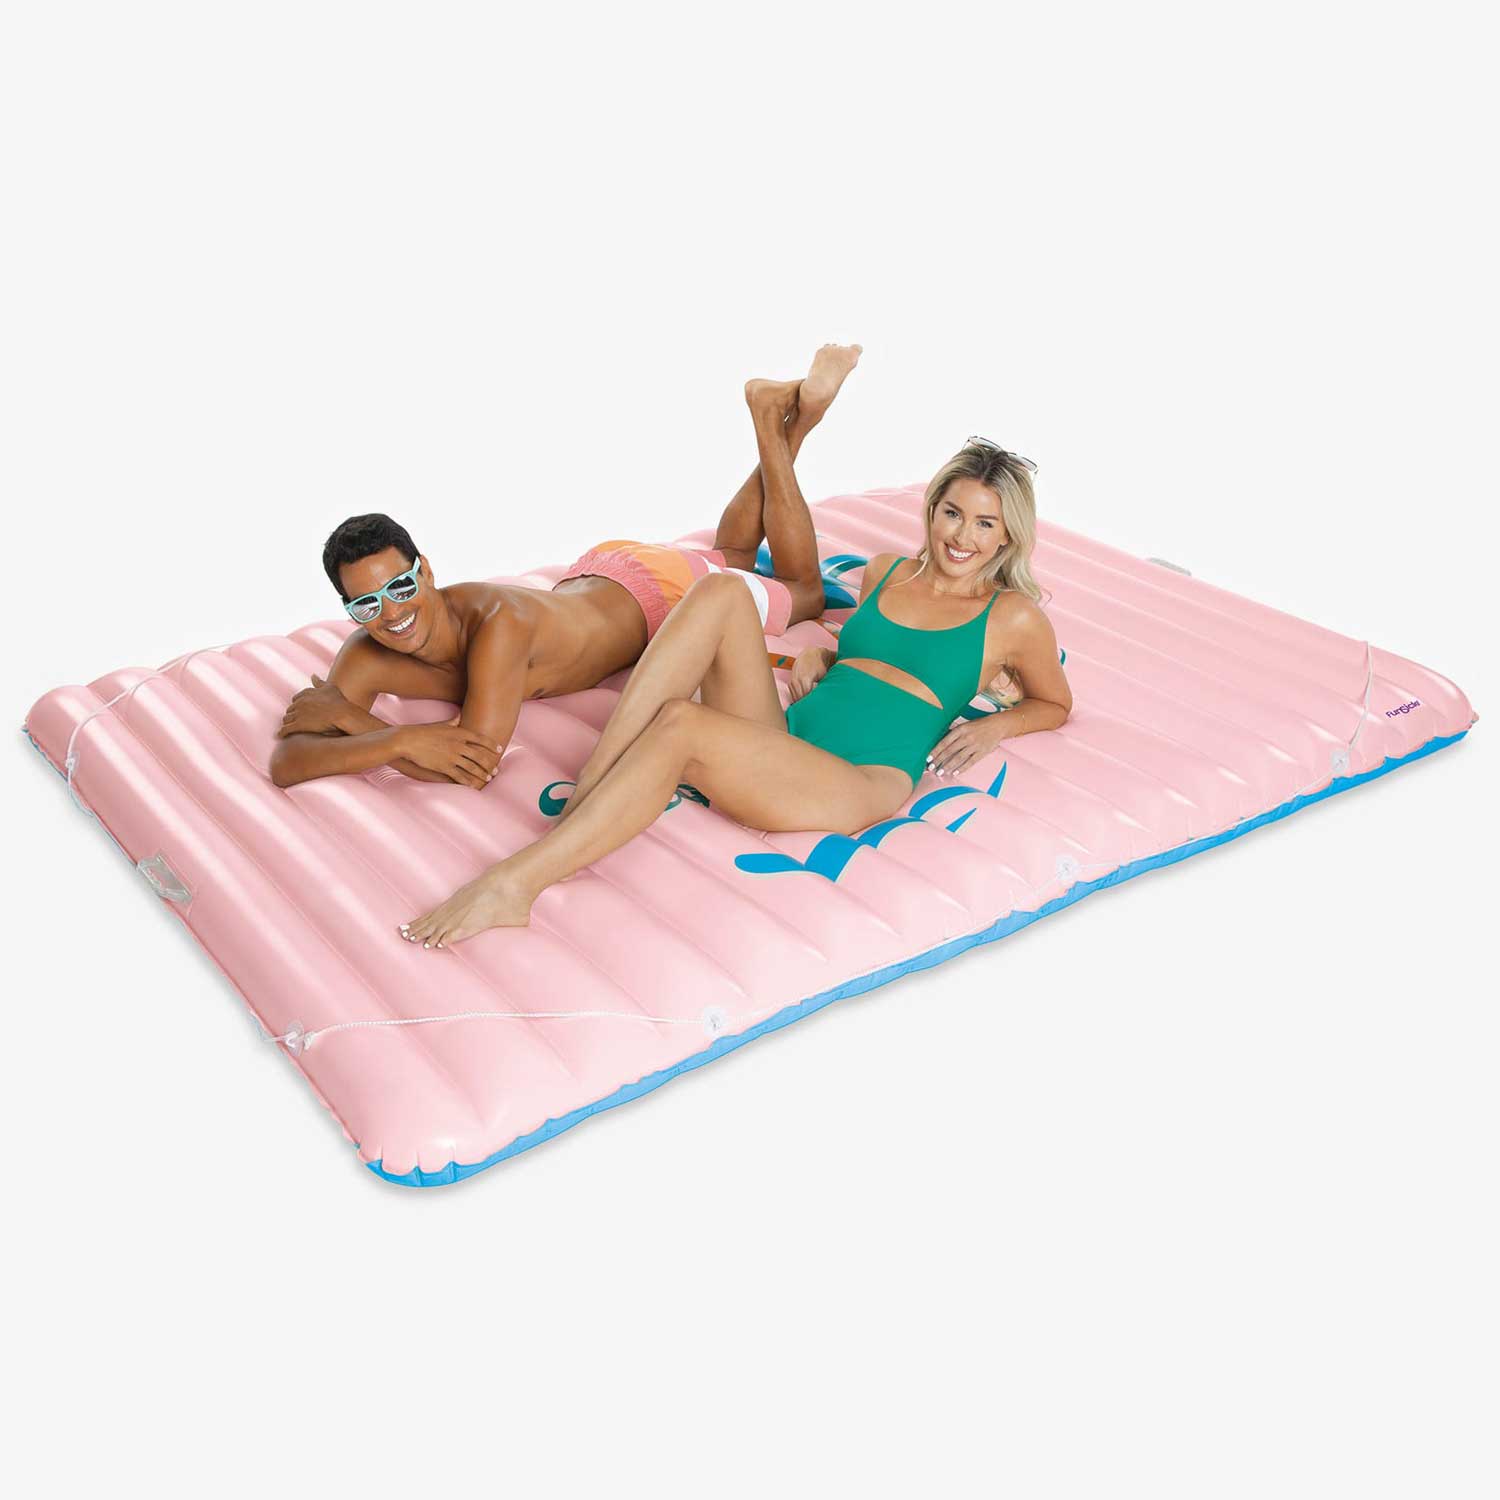 models lounging on Funsicle Float in Paradise Mat